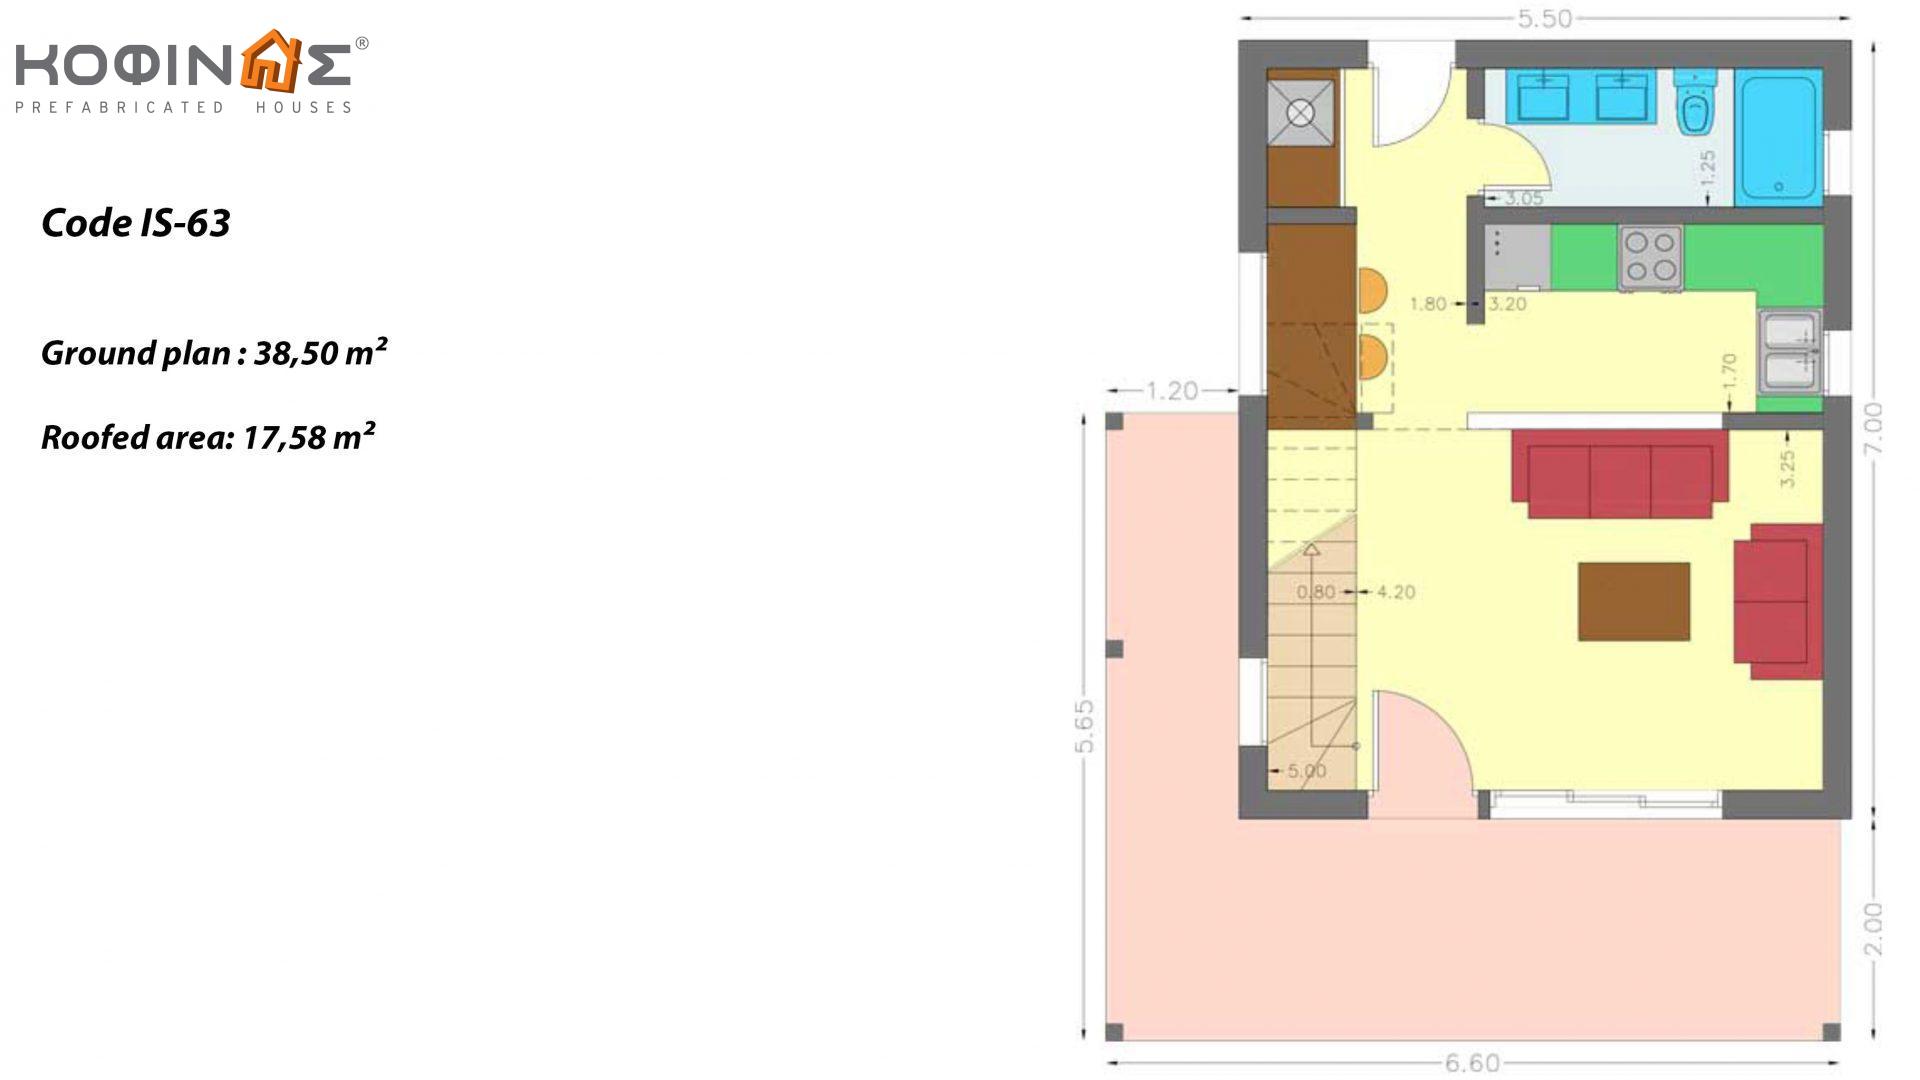 1-story house with attic IS-63, total surface of 63,65 τ.μ. ,covered roofed areas 17,58 m²